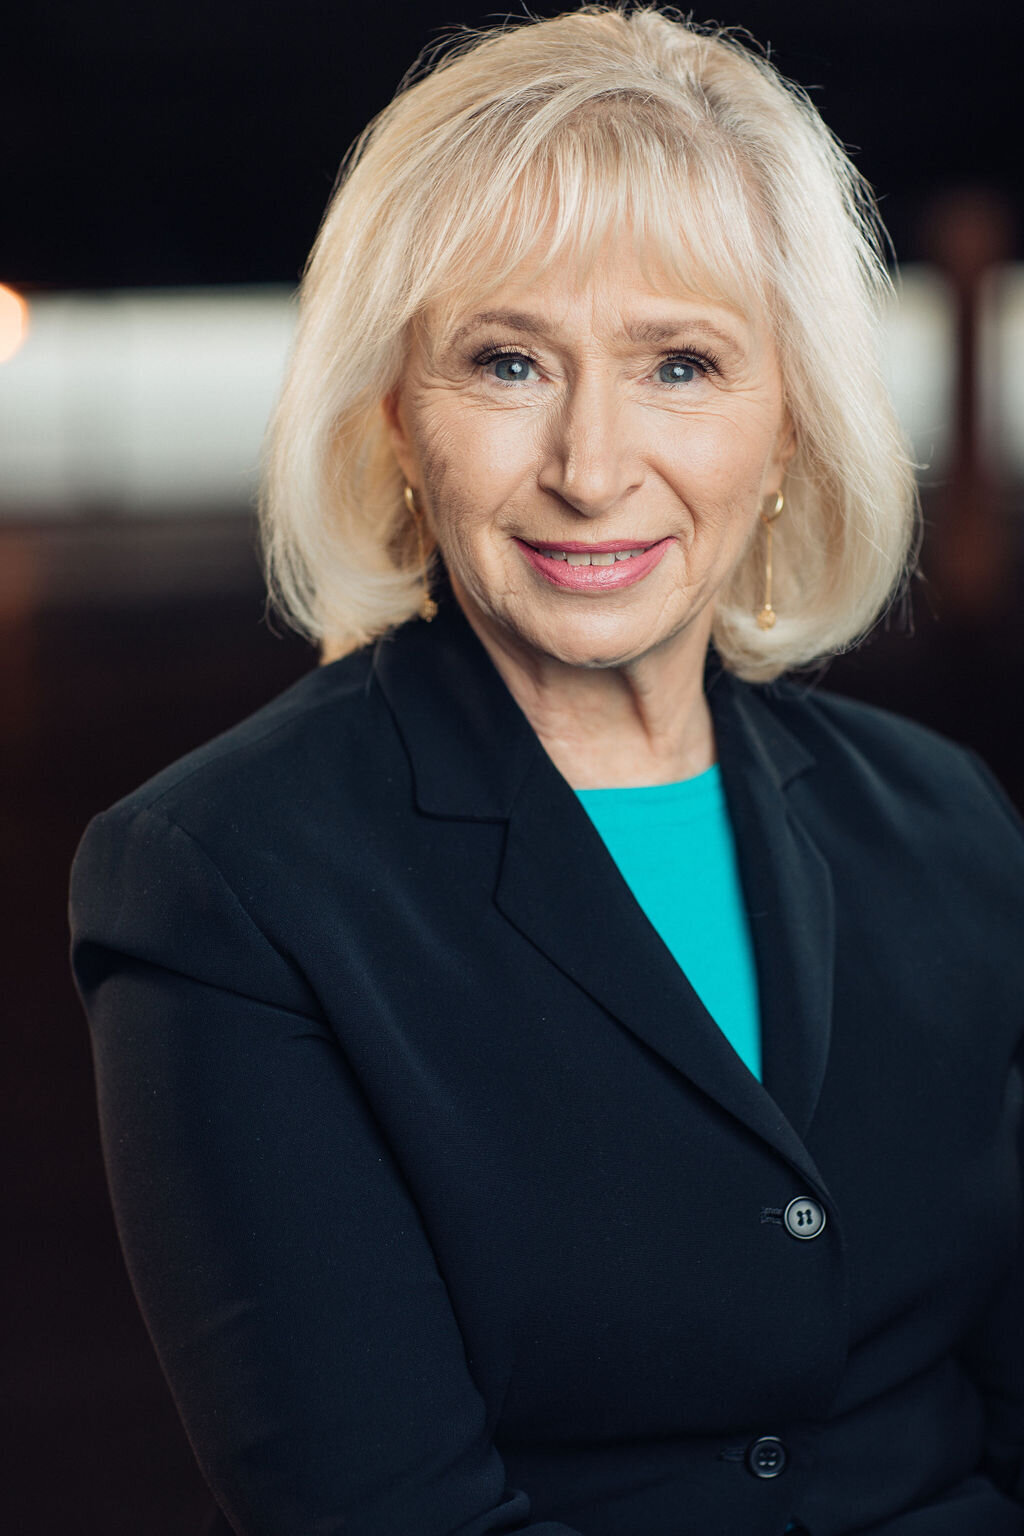 Headshot Photograph Of Woman In Outer Black Blazer And Inner Blue Shirt